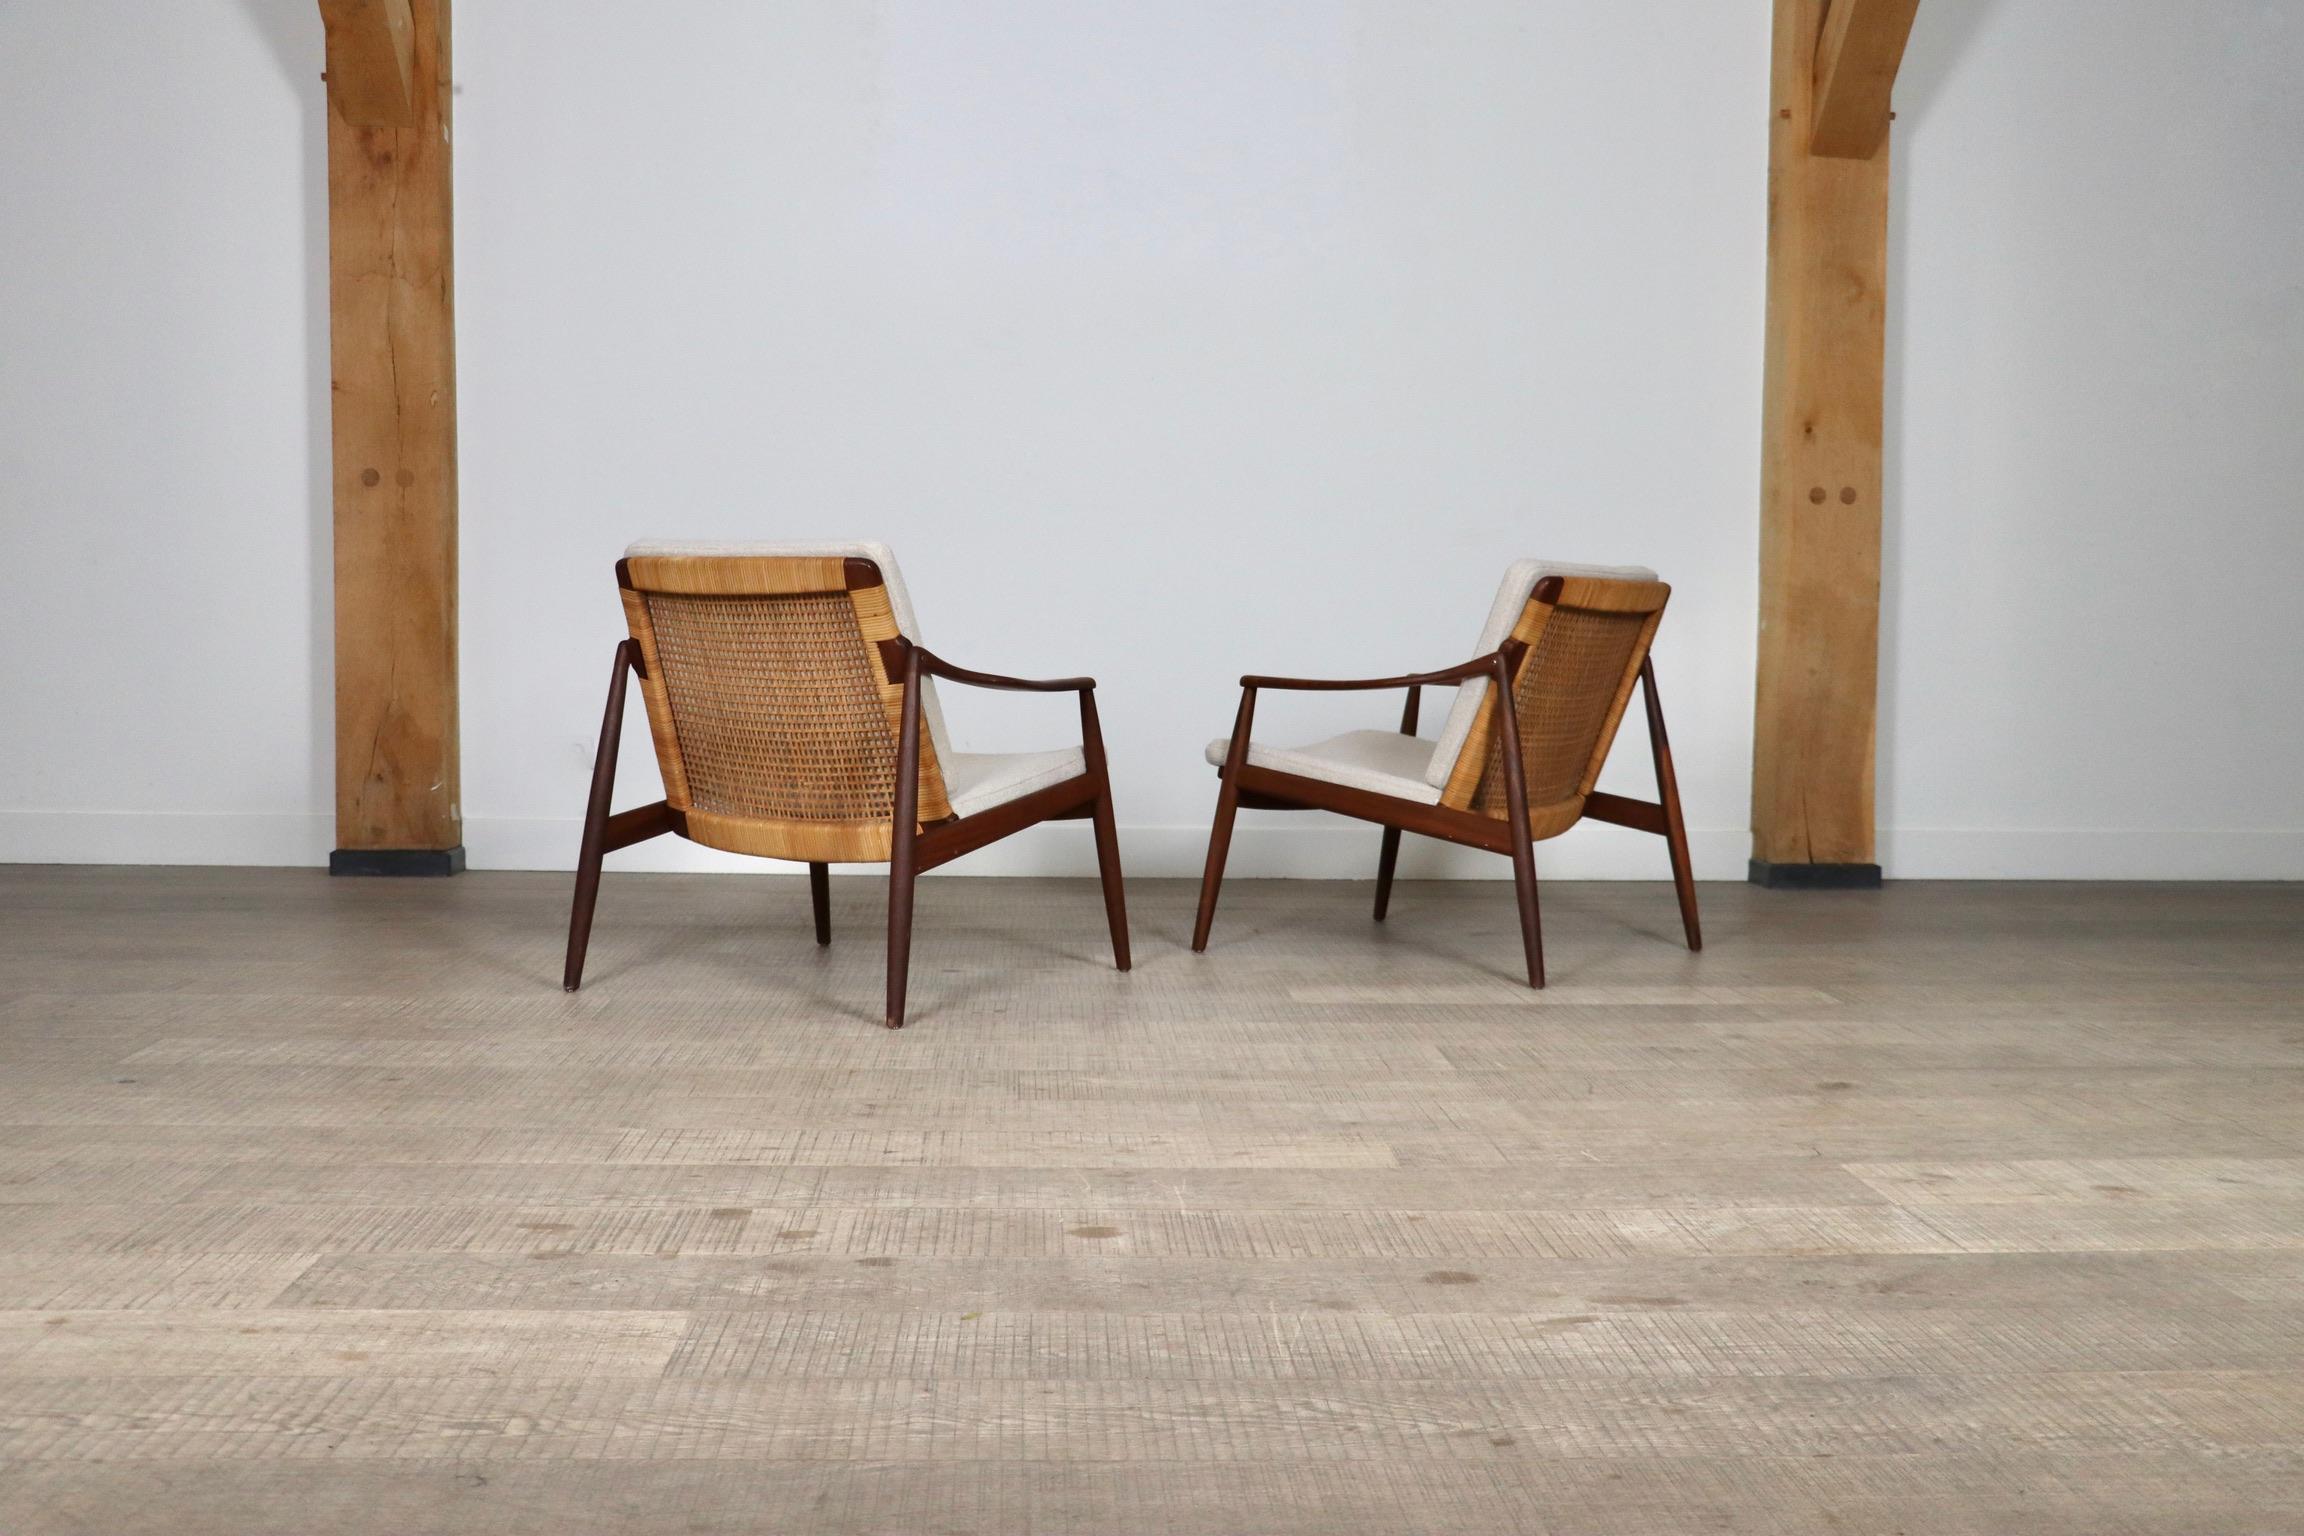 Pair Of Hartmut Lohmeyer Model 400 Lounge Chairs For Wilkhahn, 1959 For Sale 2